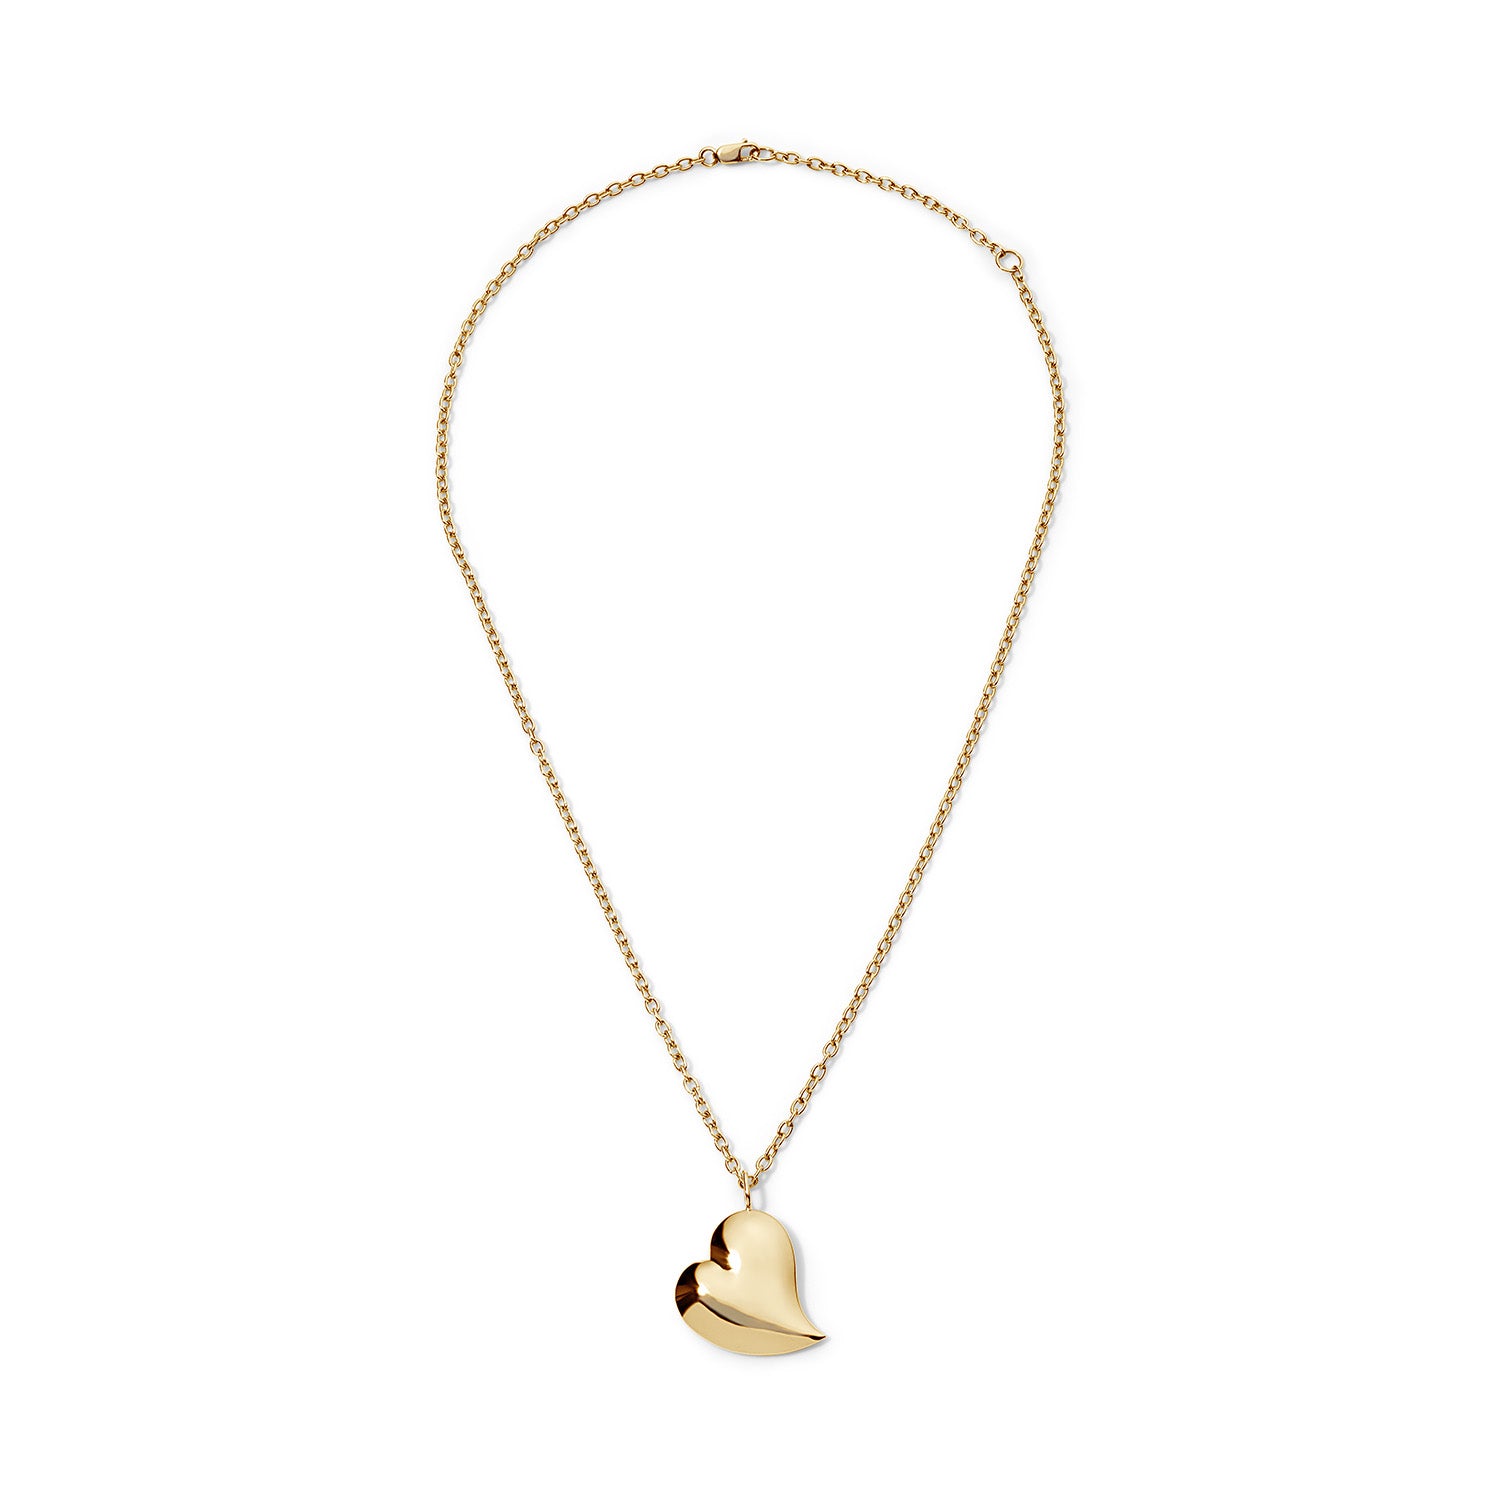 Heartfelt Gold Medium Puffy Heart with Cable Chain Necklace